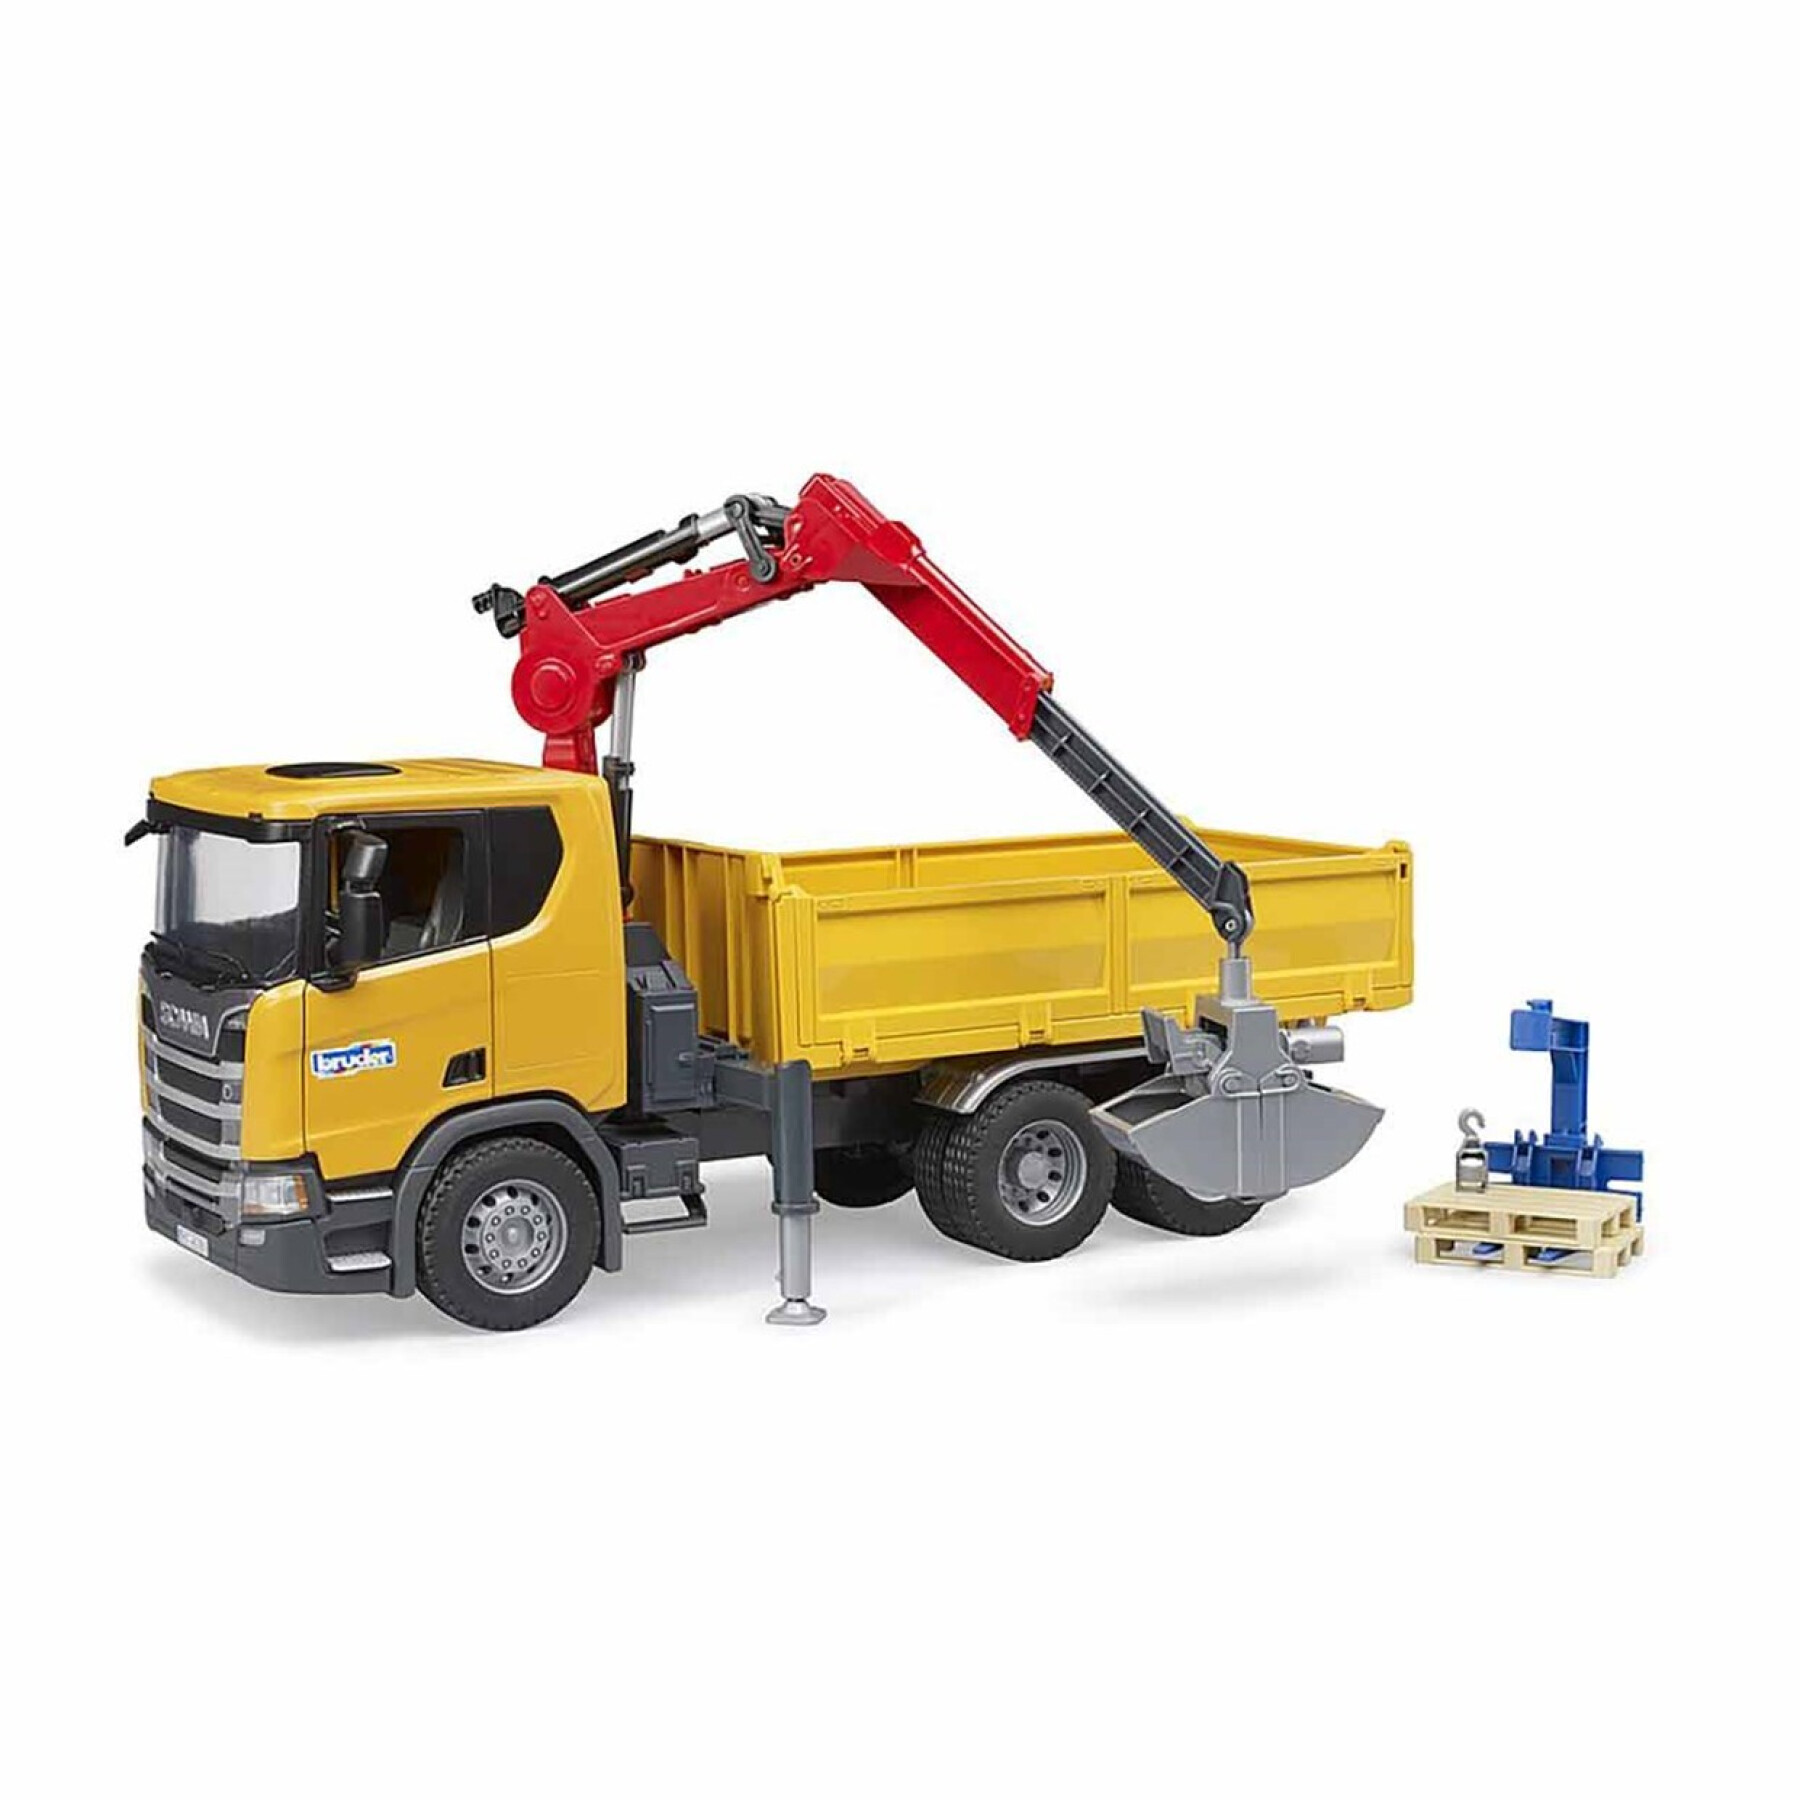 Car games - scania super 560r construction truck with accessories Bruder